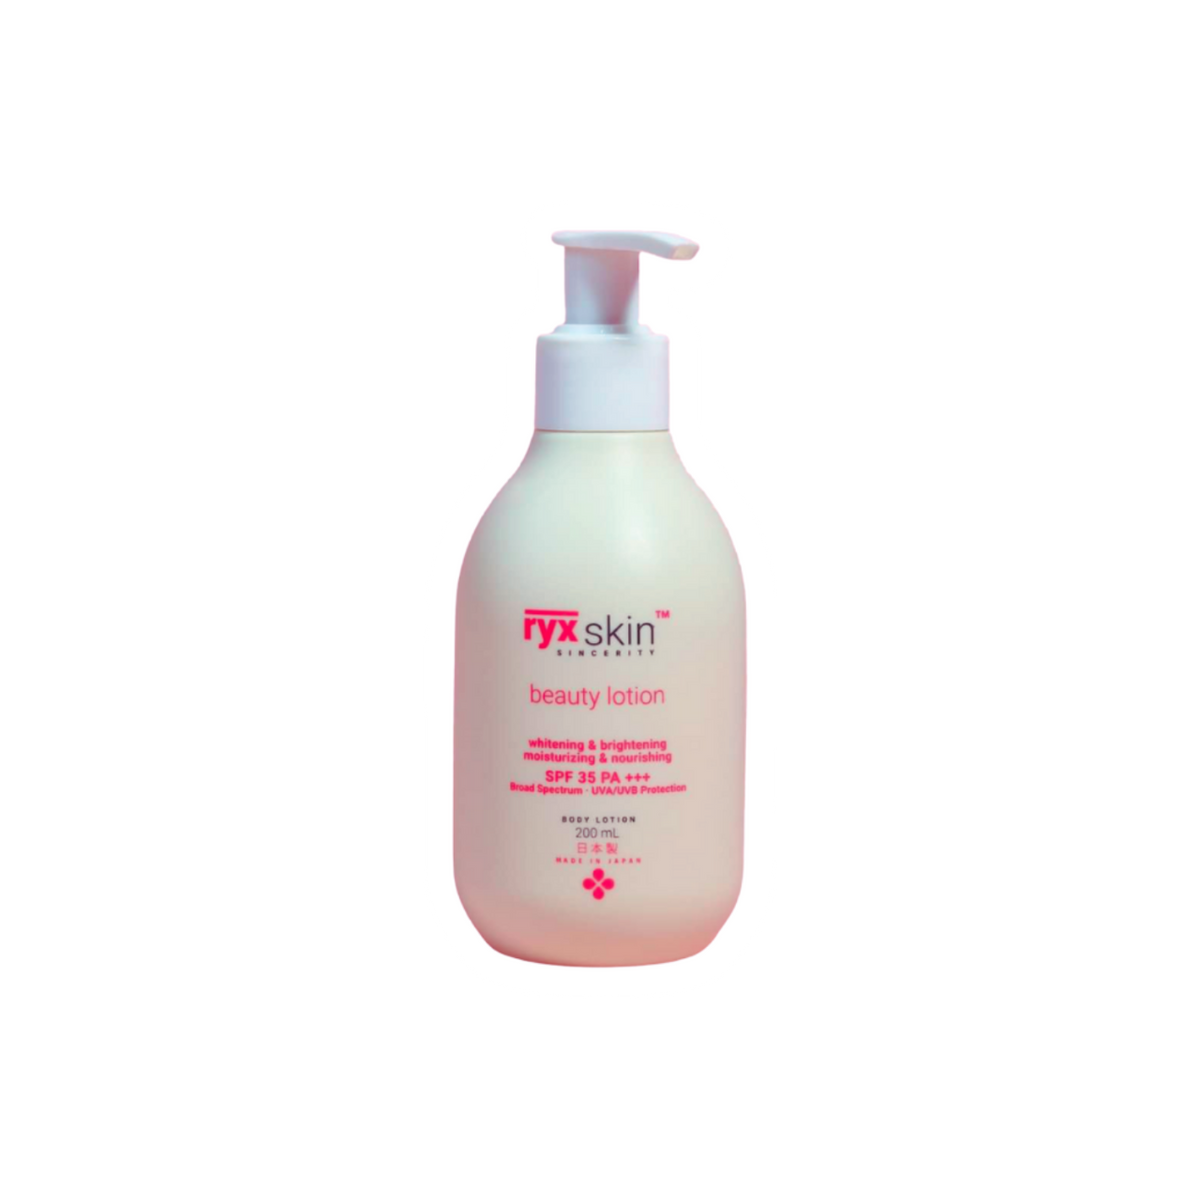 Ryxskin Sincerity Beauty lotion with COLLAGEN and VITAMIN E SPF 35 PA+++  200 mL